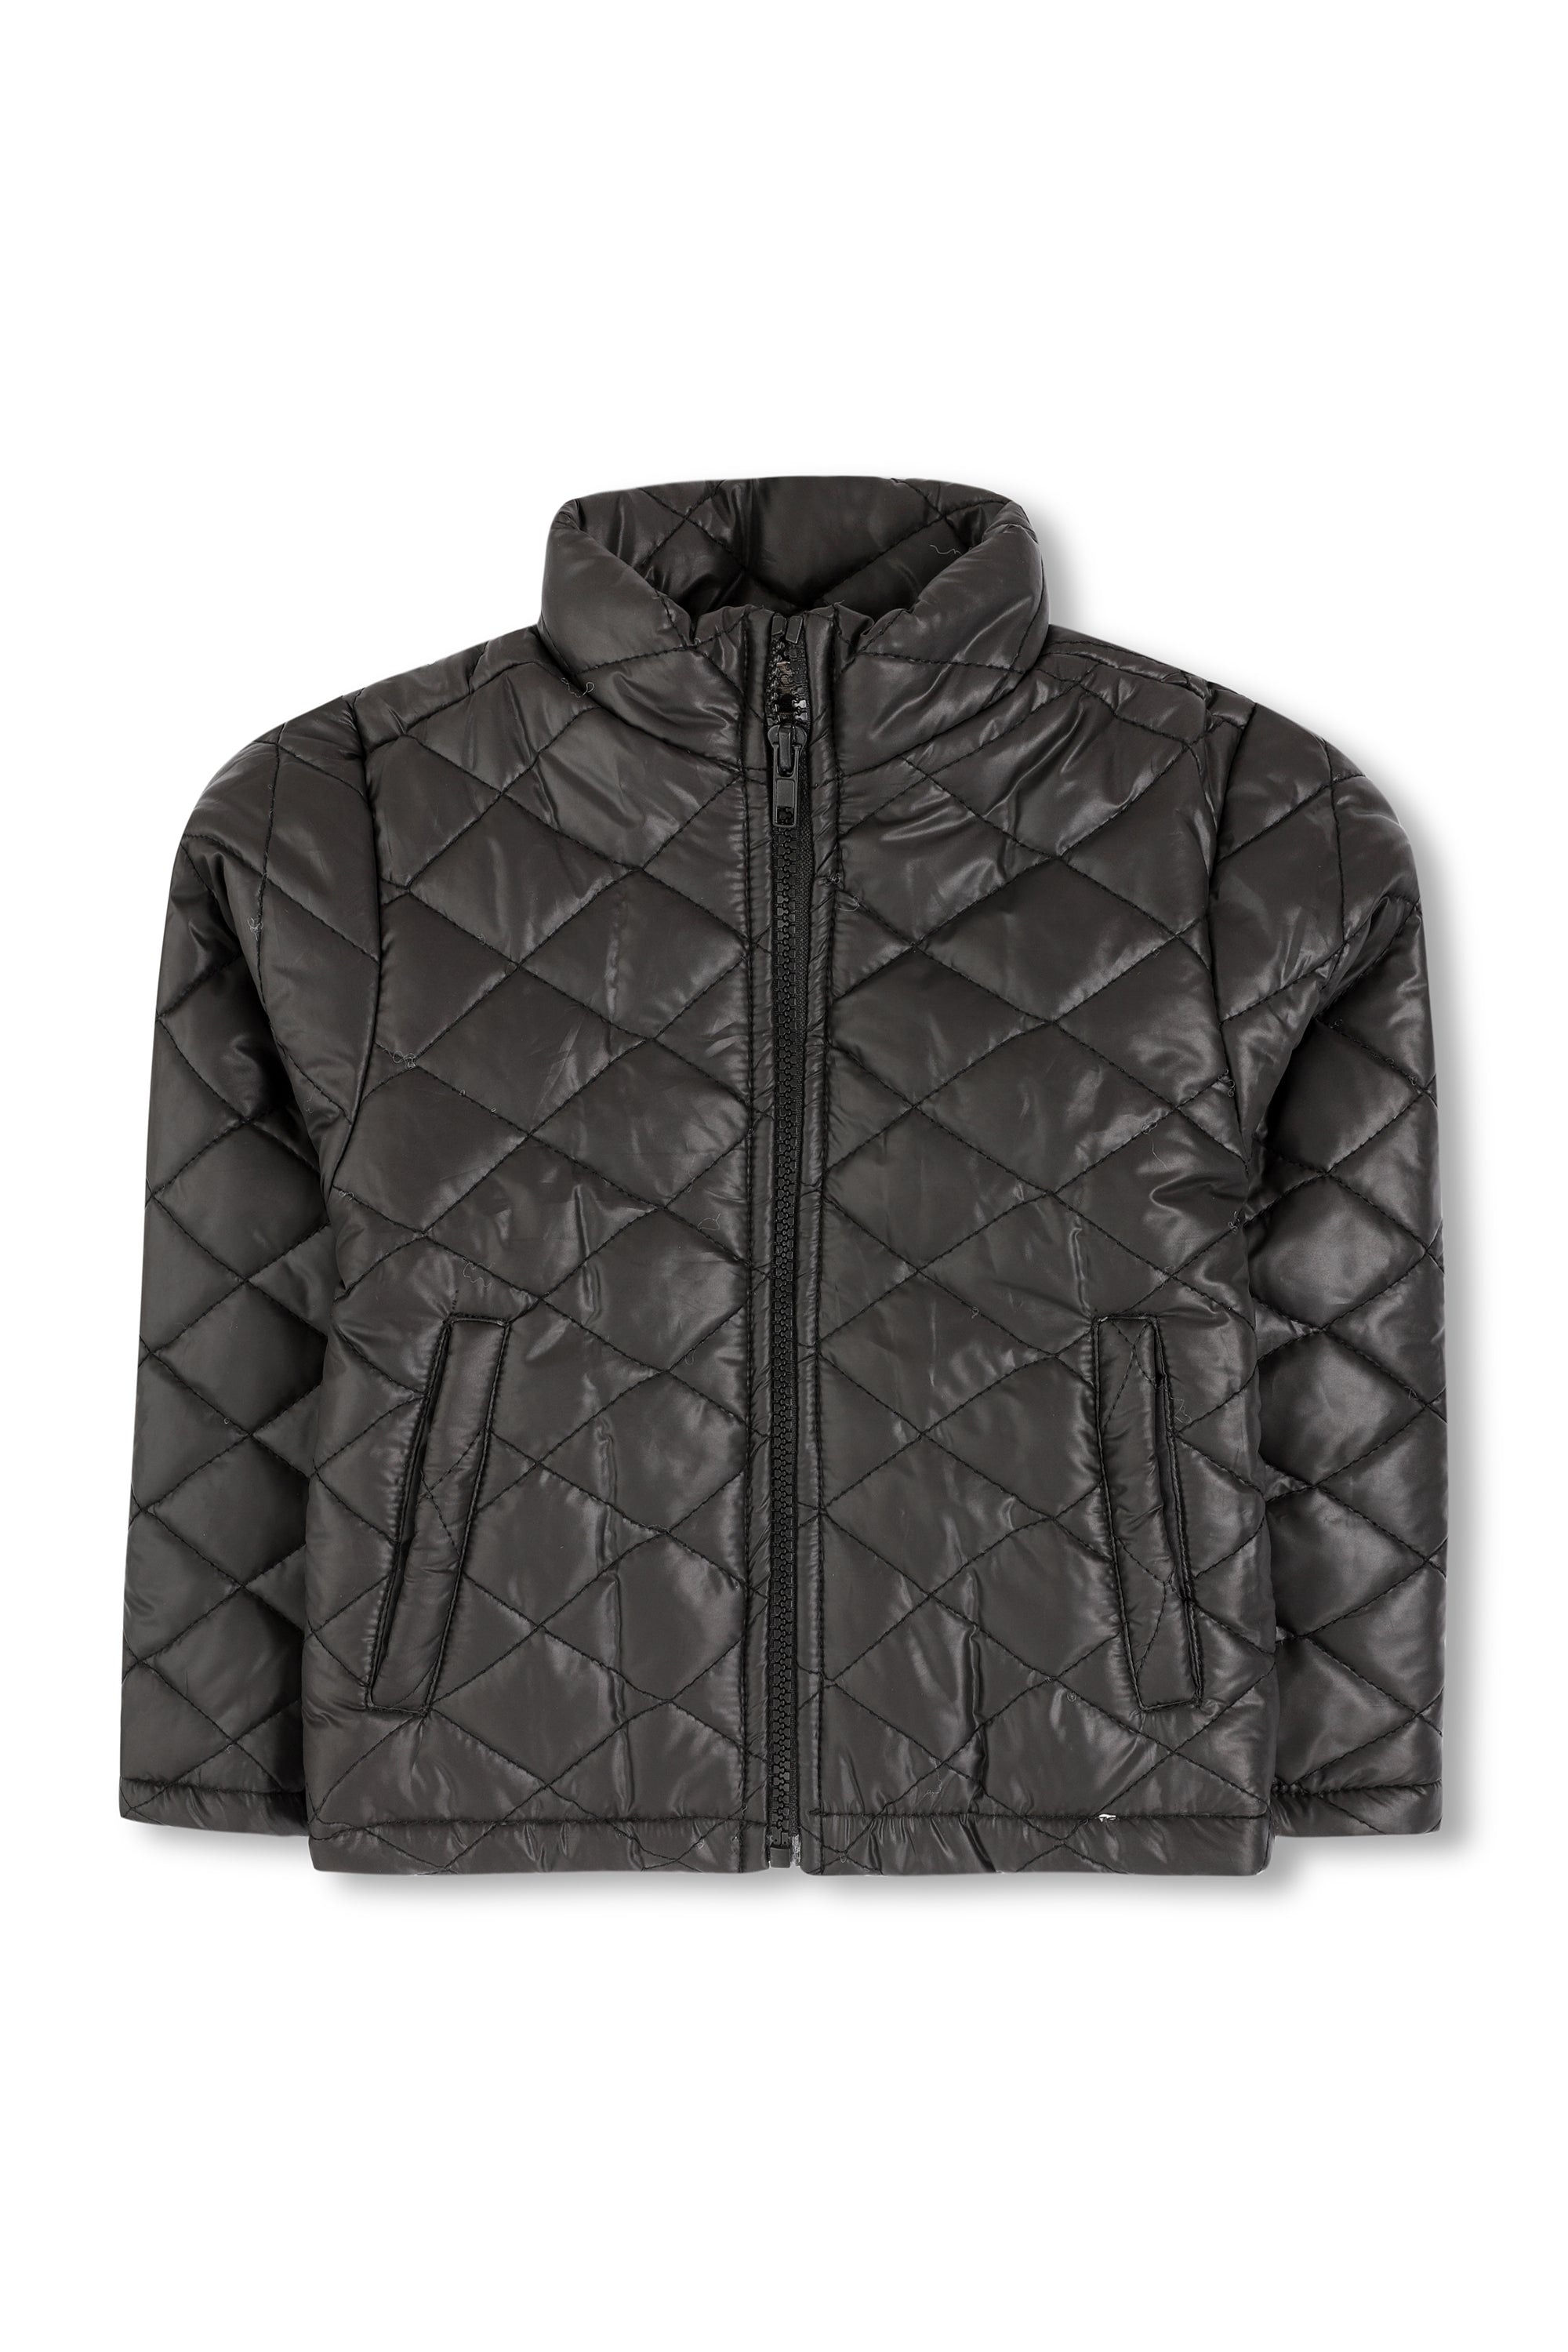 Boys Black Quilted Jacket